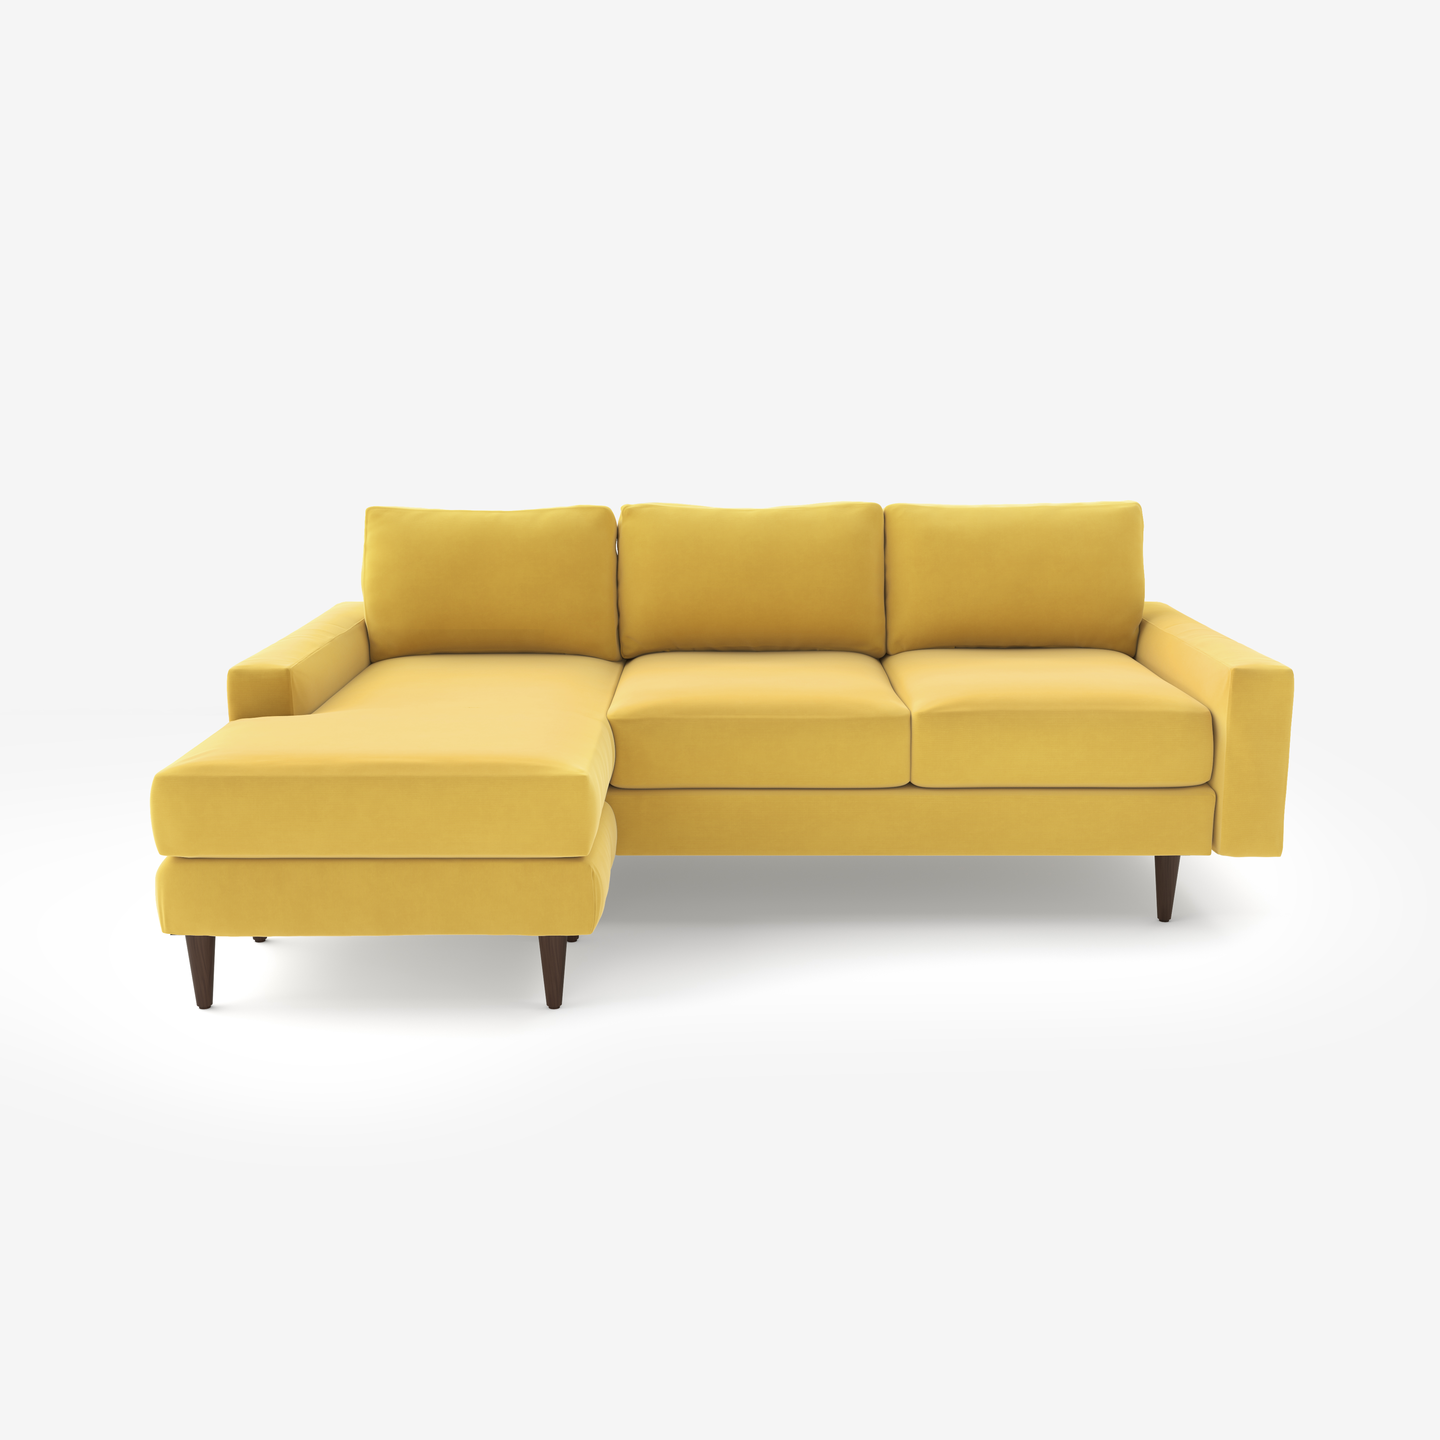 1613_Brooks-Sectional-Convertible-Yellow_Front-Left_2021